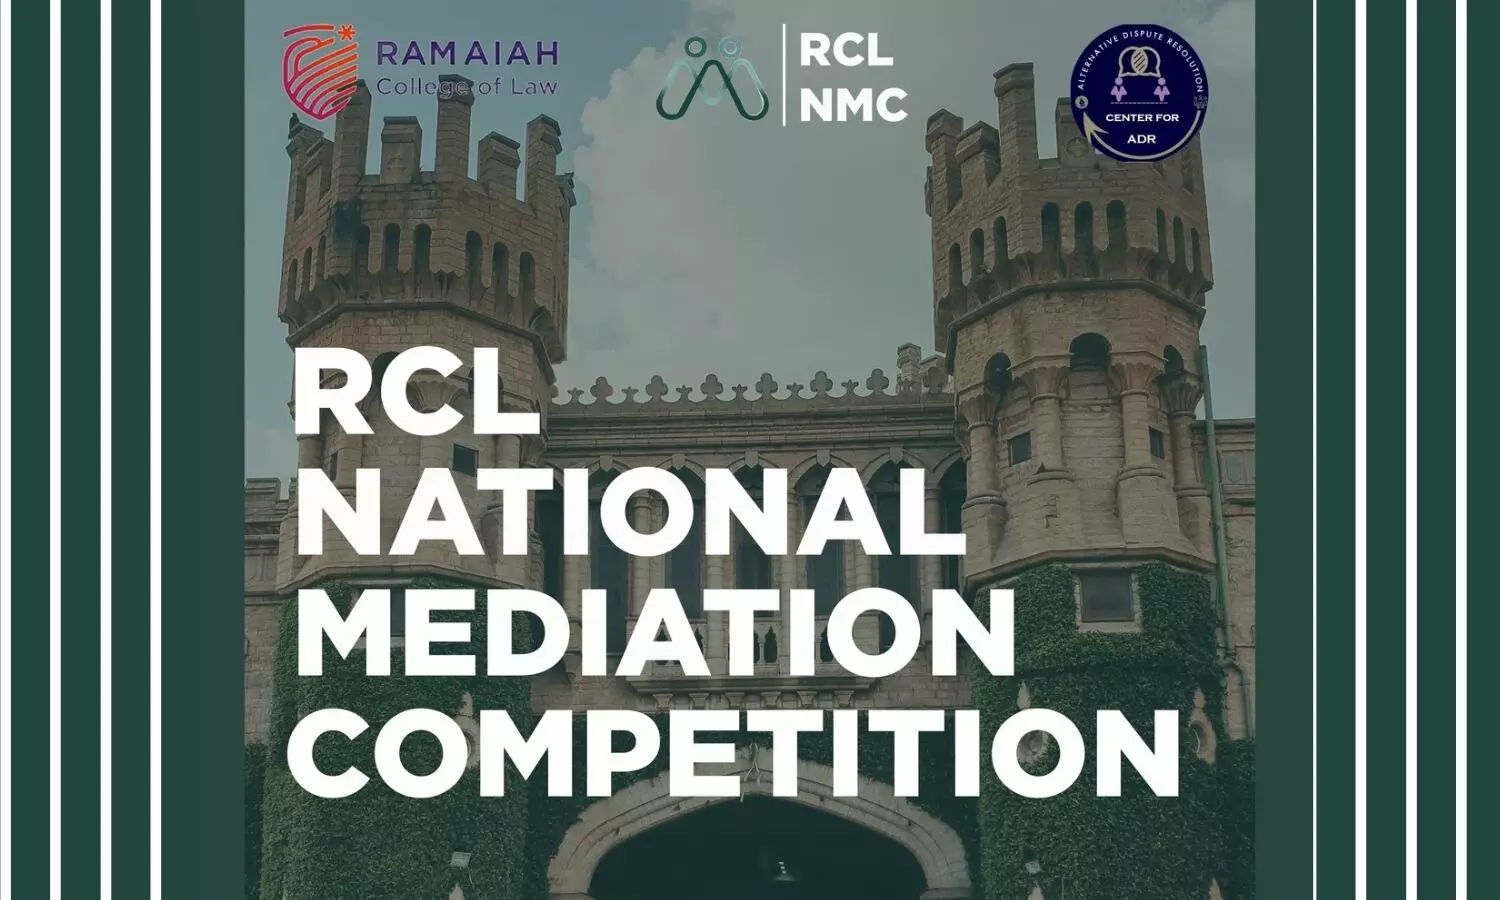 RCL National Mediation Competition  Ramiah College of Law